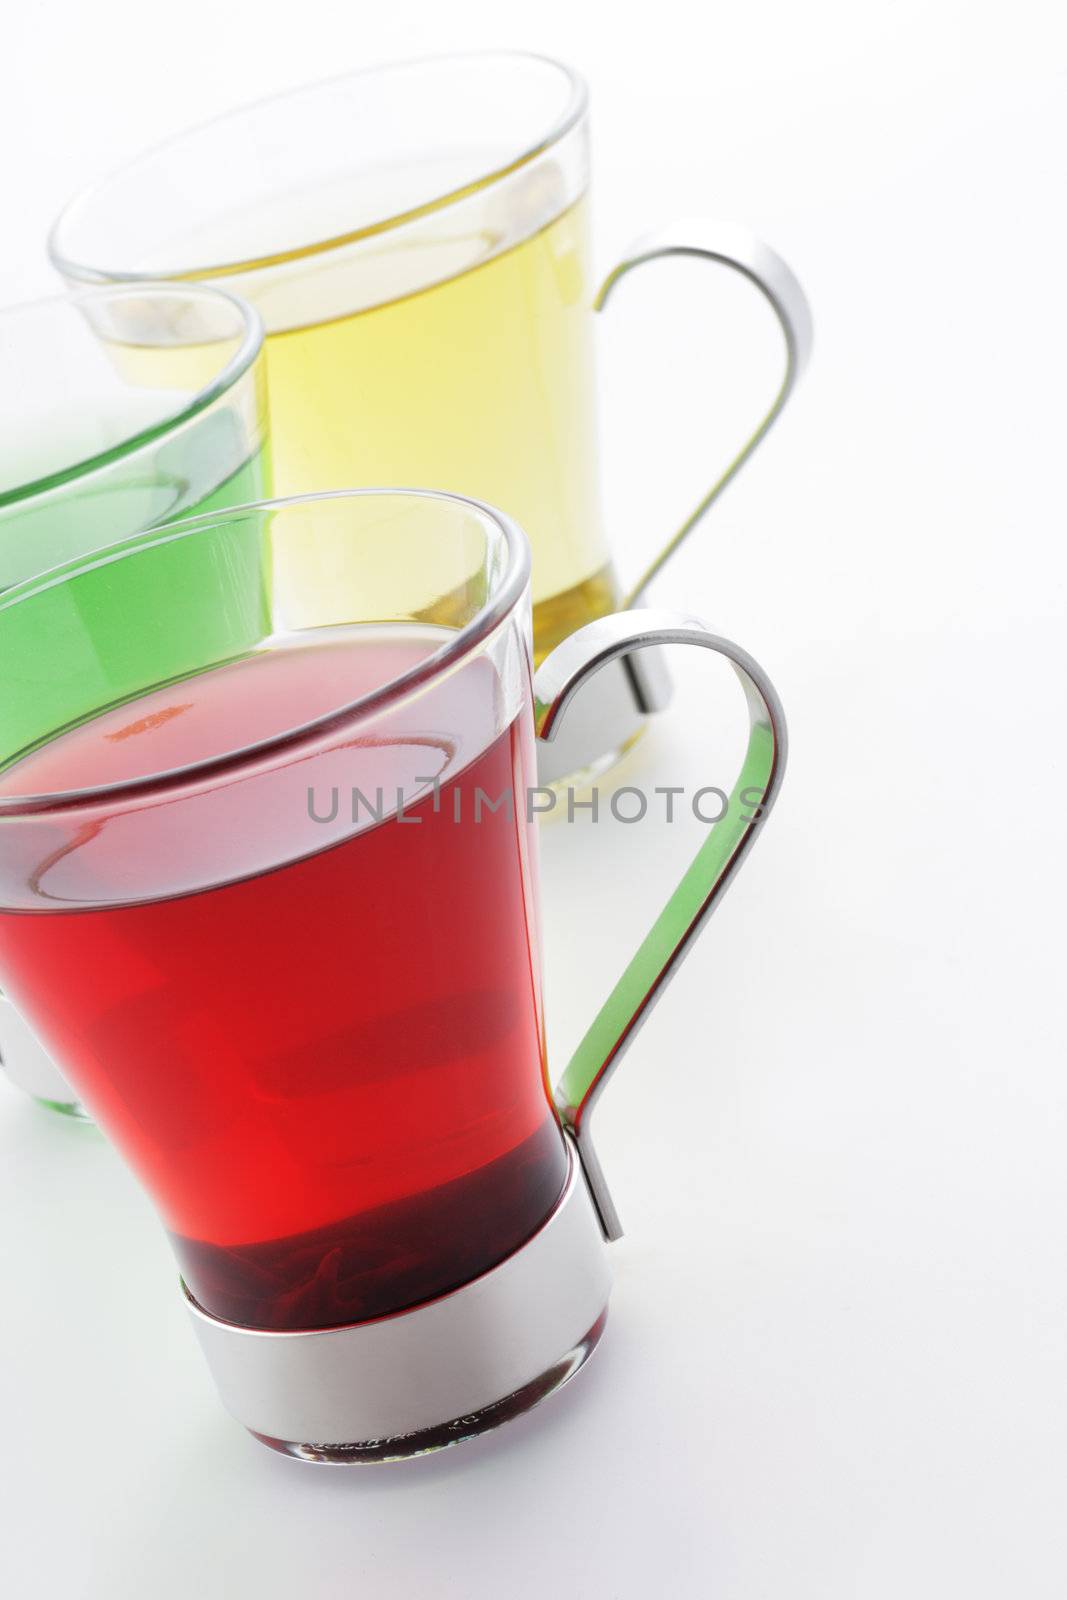 Cups of tea on white background